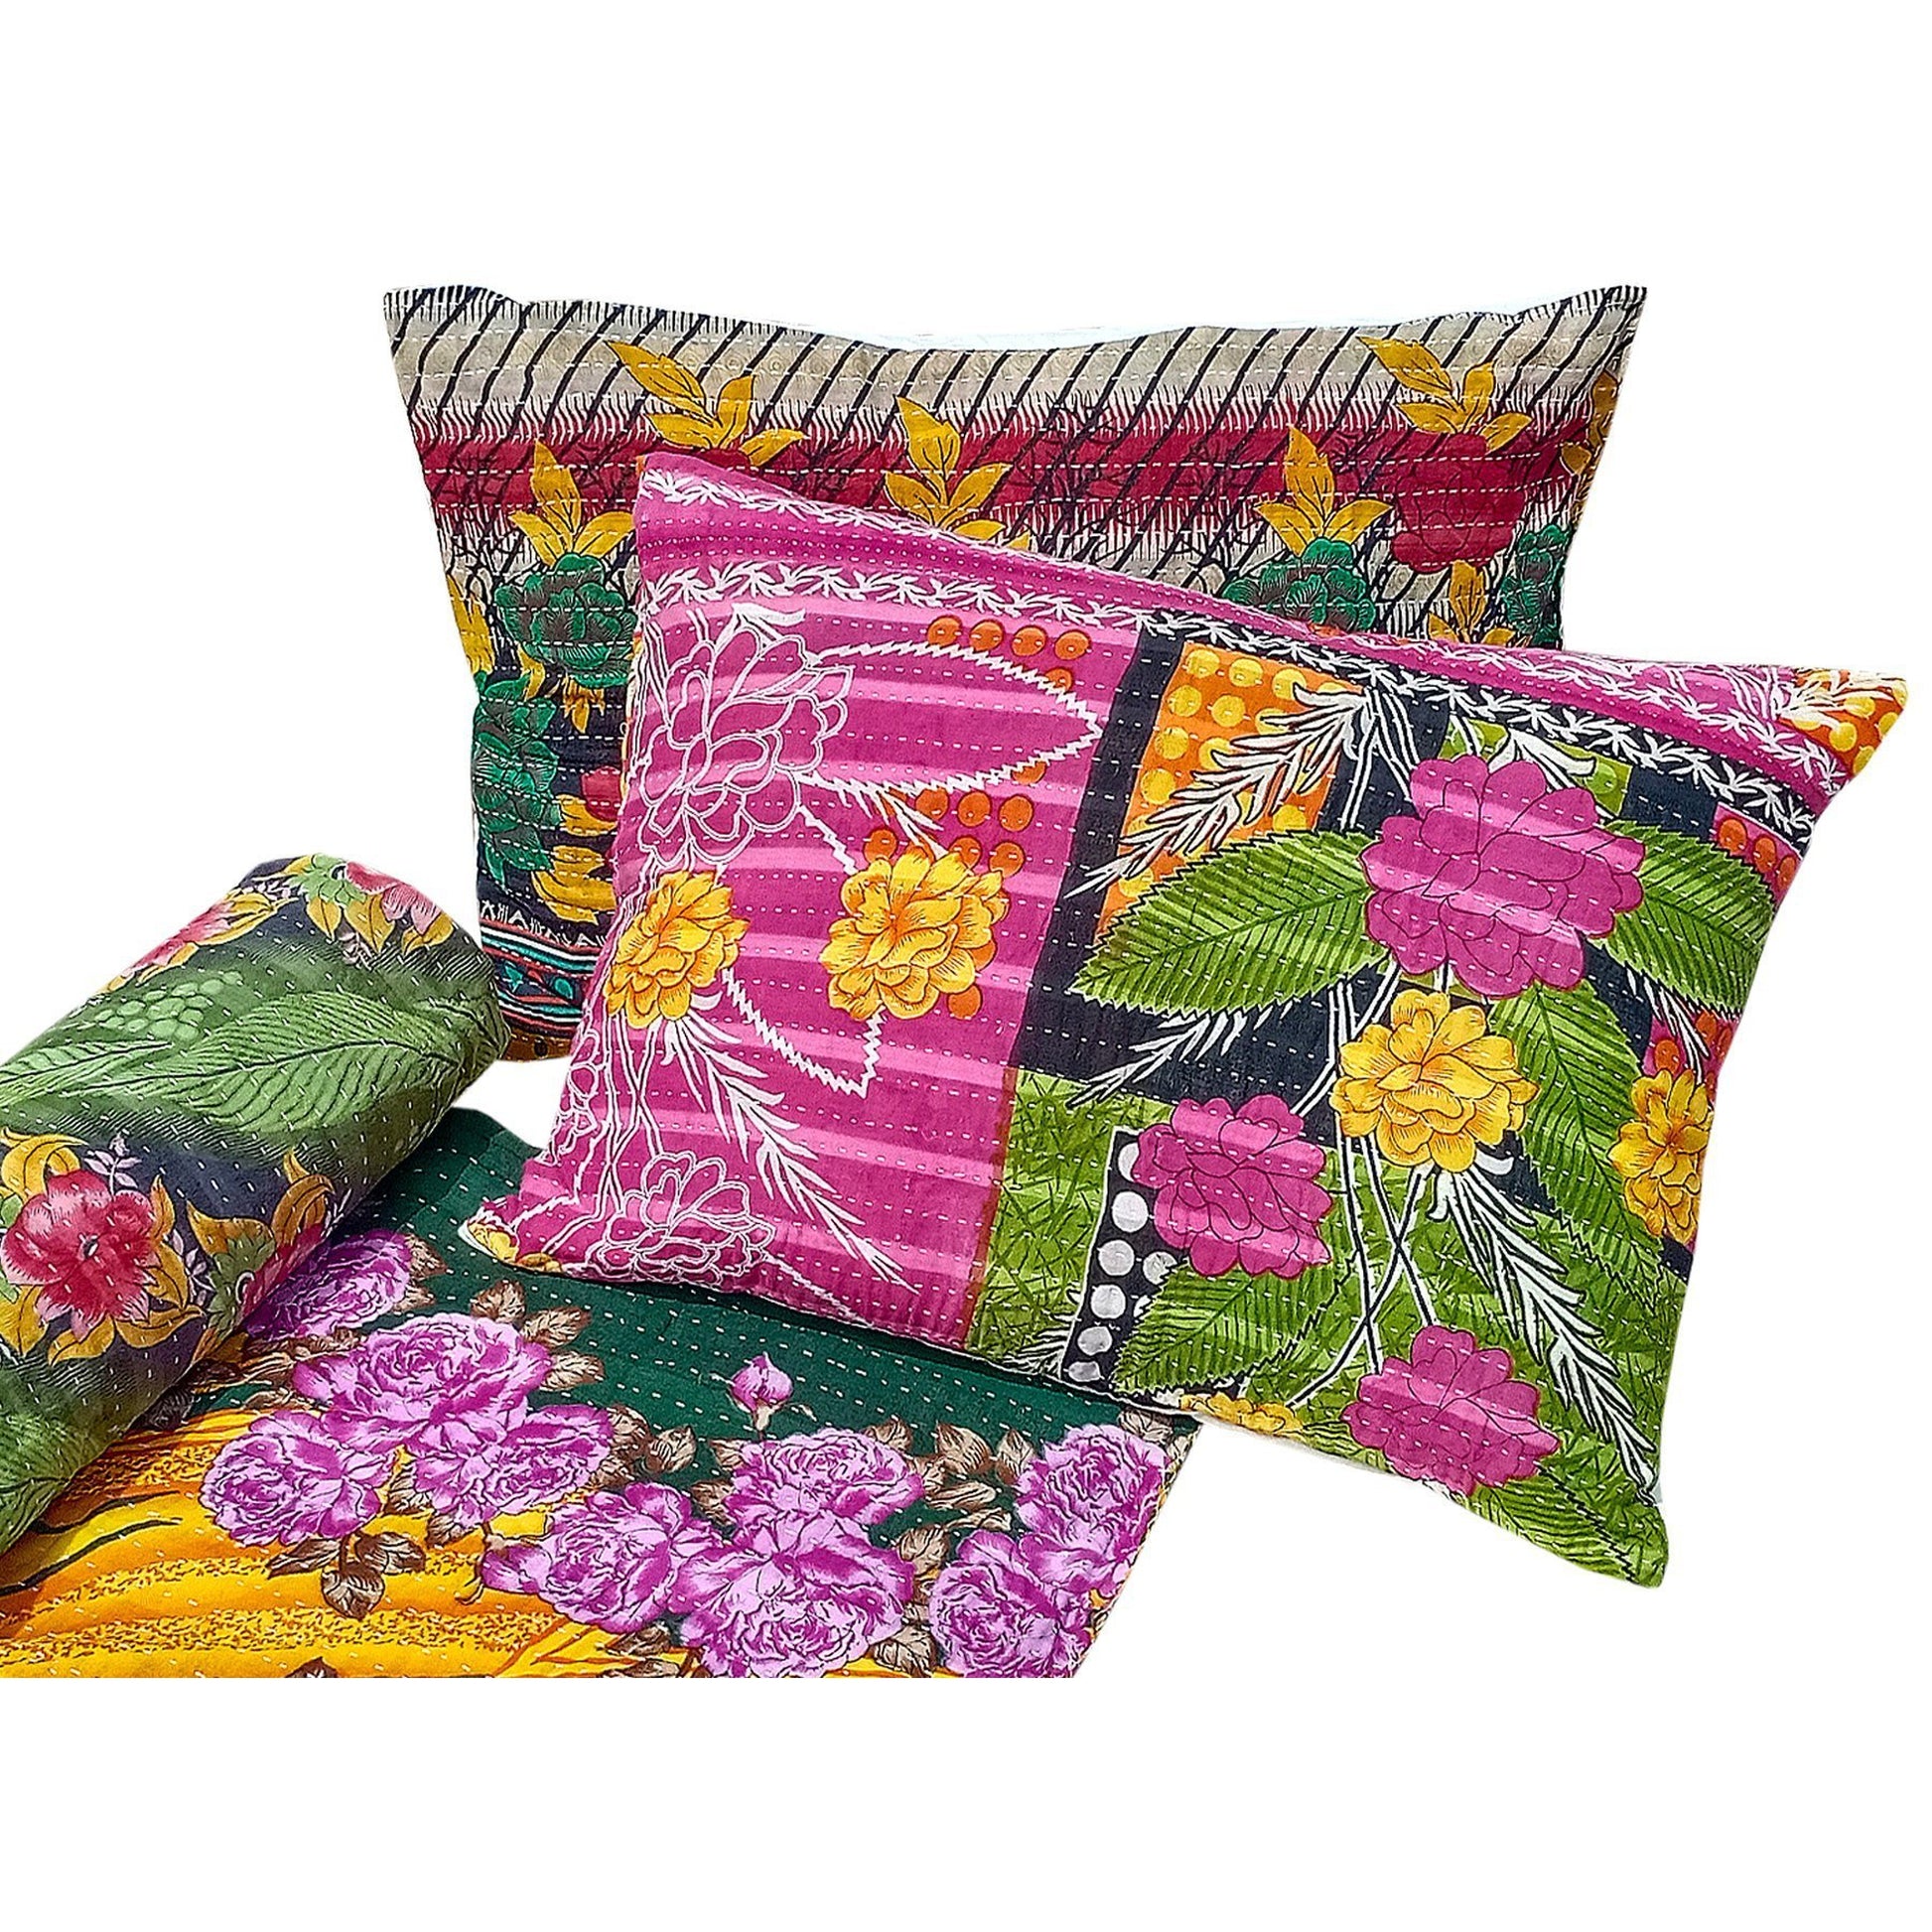 Boho Vintage Kantha Quilt with 2 pillow covers- King size - The Teal Thread